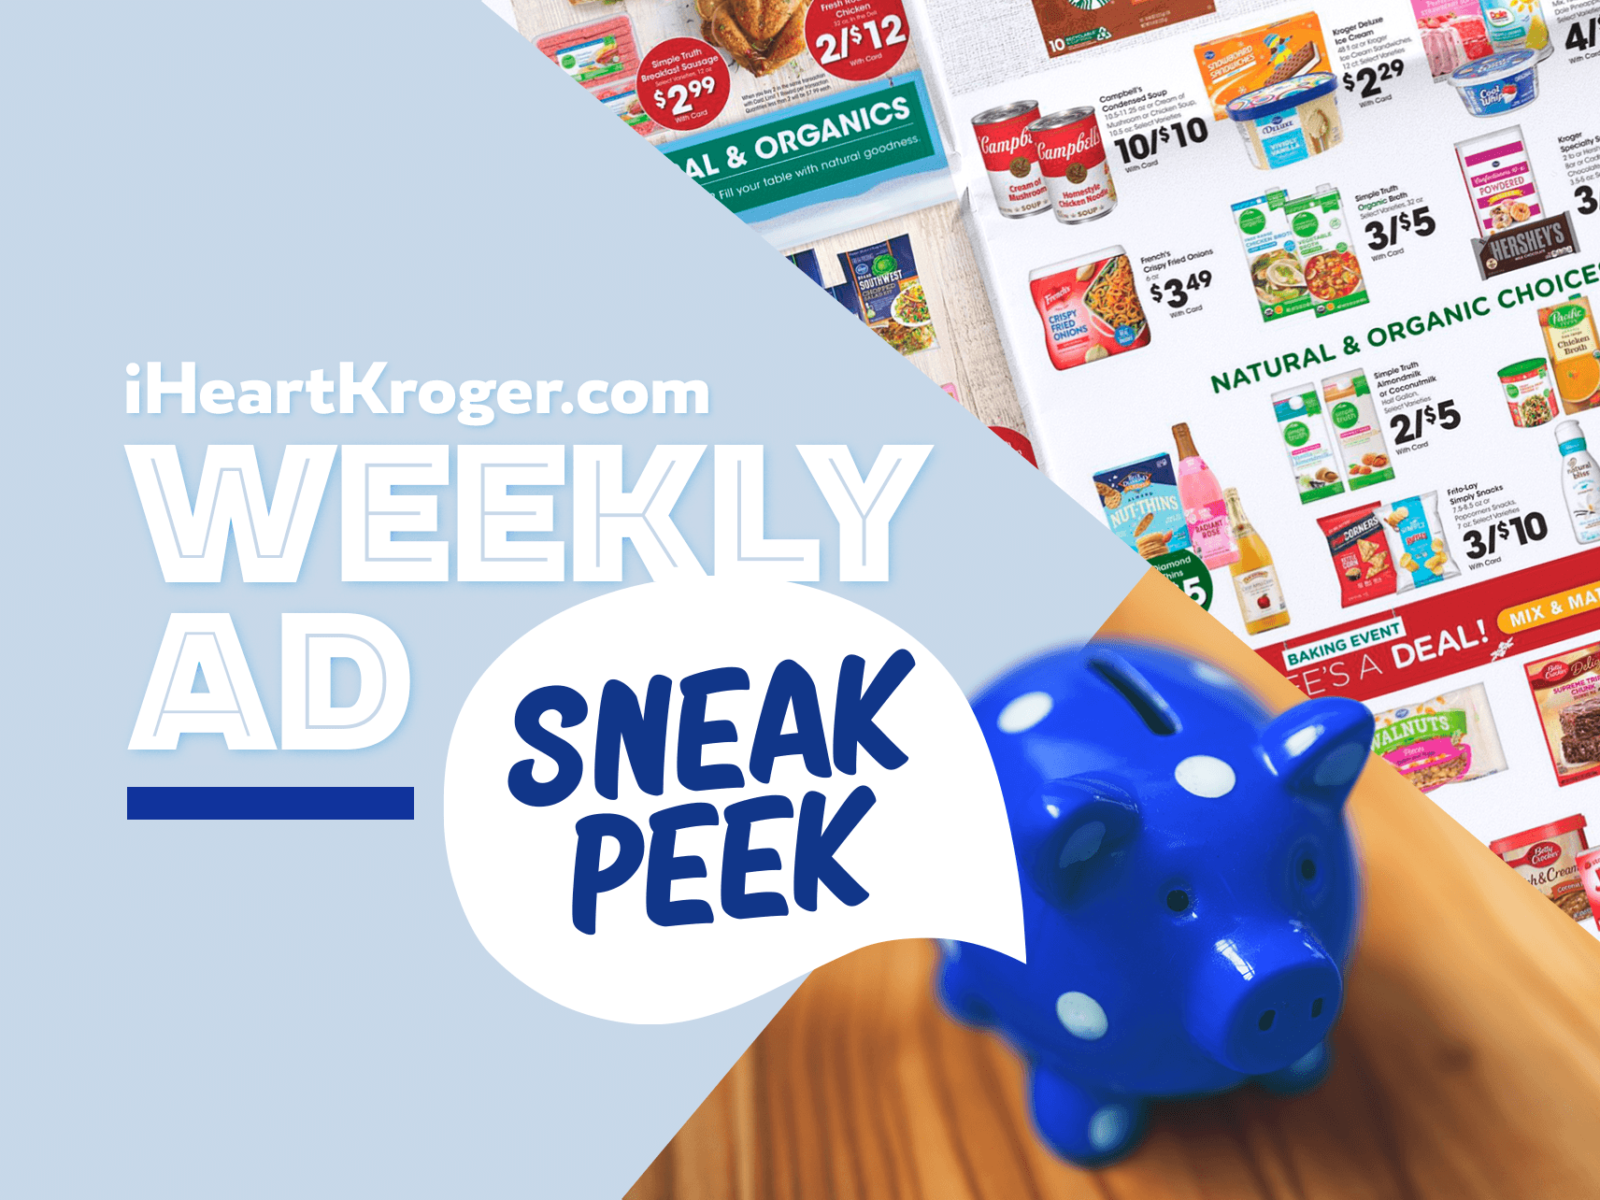 Kroger Ad & Coupons Week Of 3/8 to 3/14 – Mega Sale Continues!